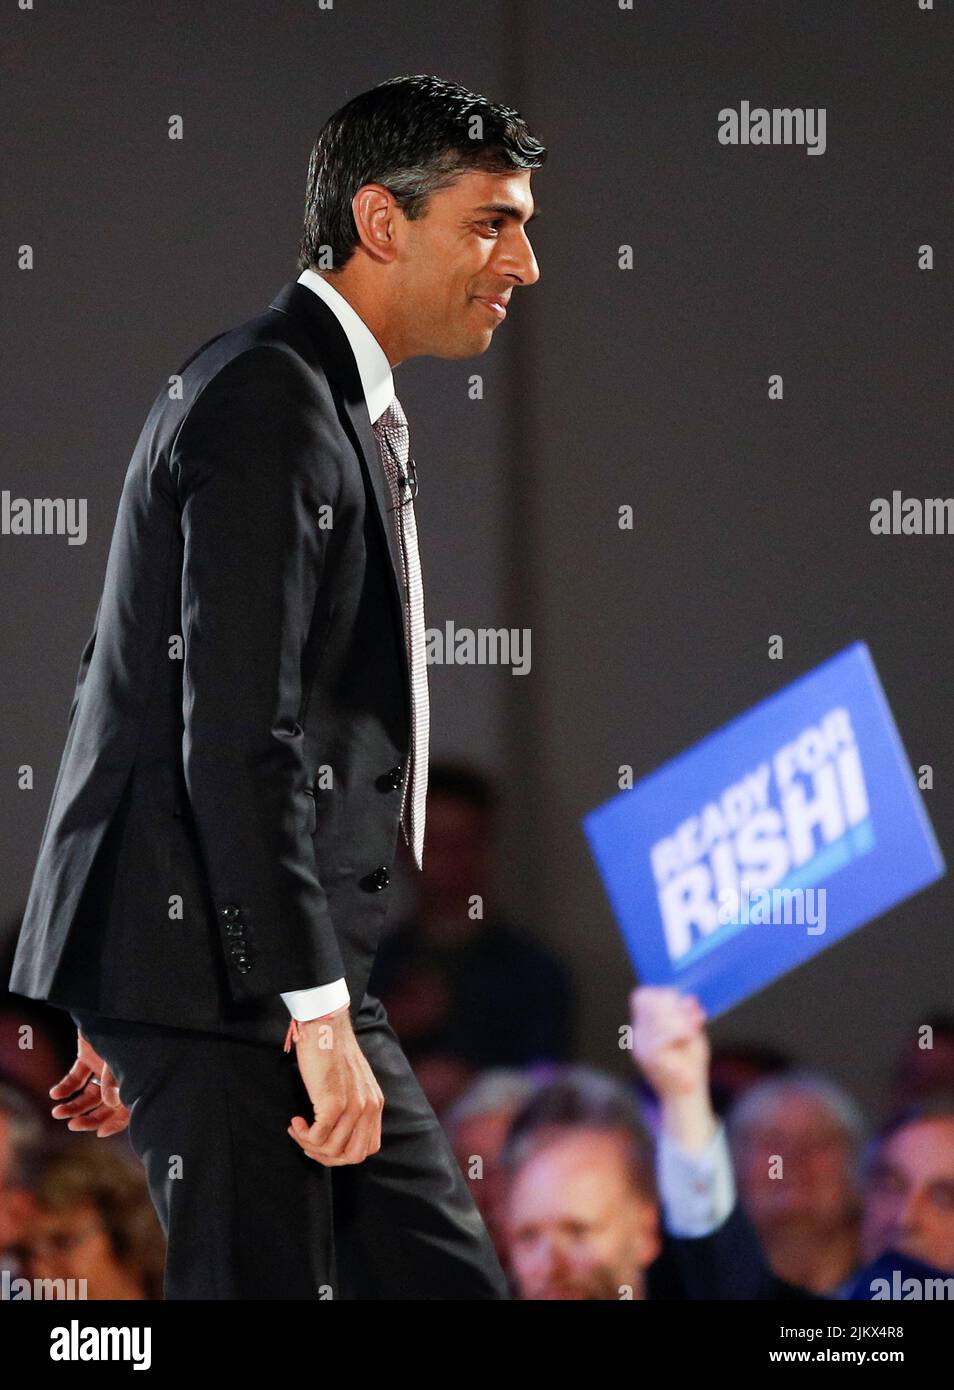 Conservative leadership candidate Rishi Sunak attends a hustings event, part of the Conservative party leadership campaign, in Cardiff, Britain, August 3, 2022. REUTERS/Peter Nicholls Stock Photo